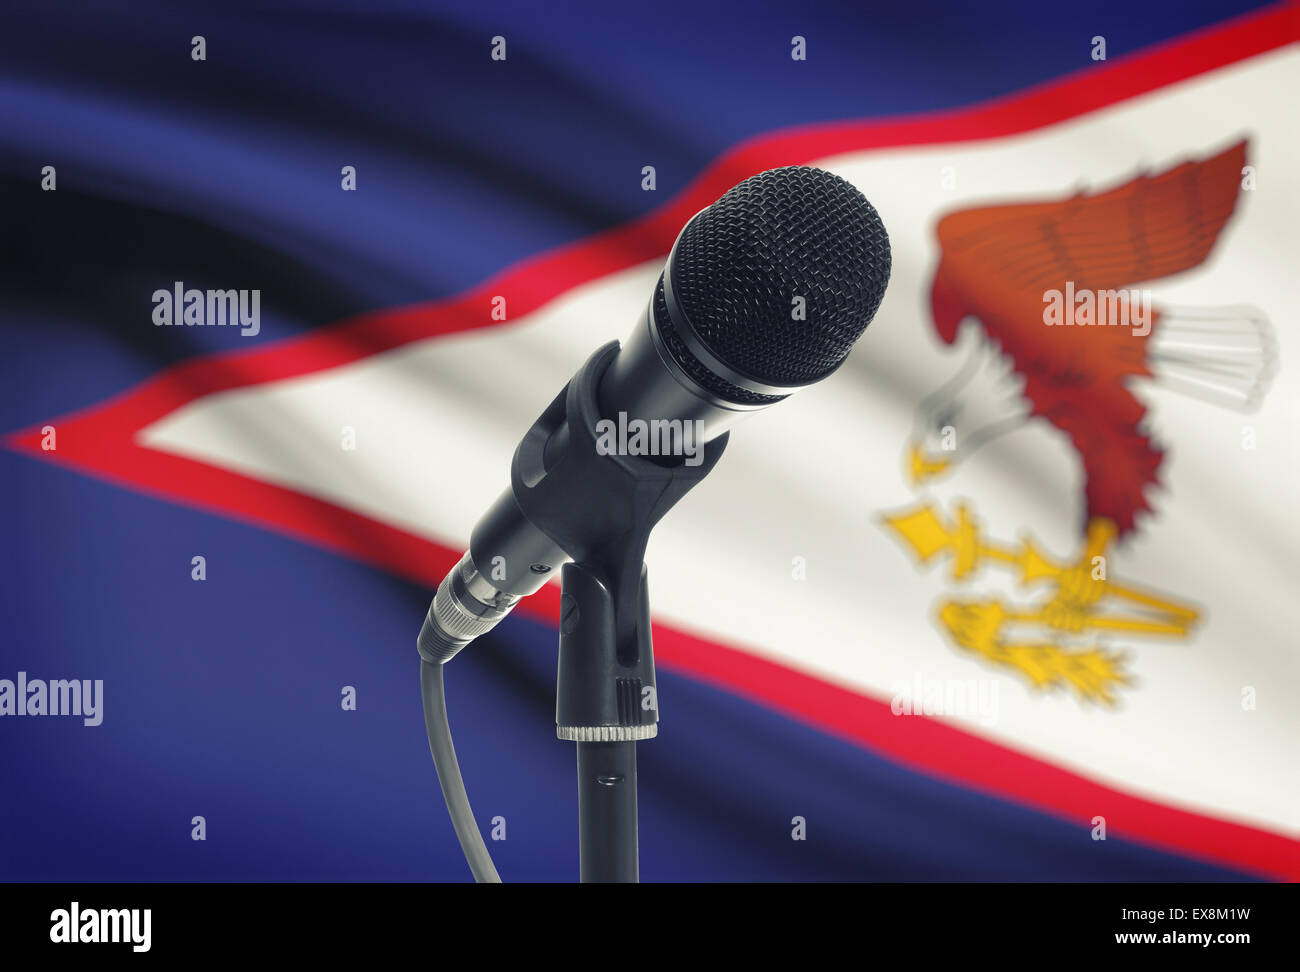 Microphone with national flag on background series - American Samoa Stock Photo